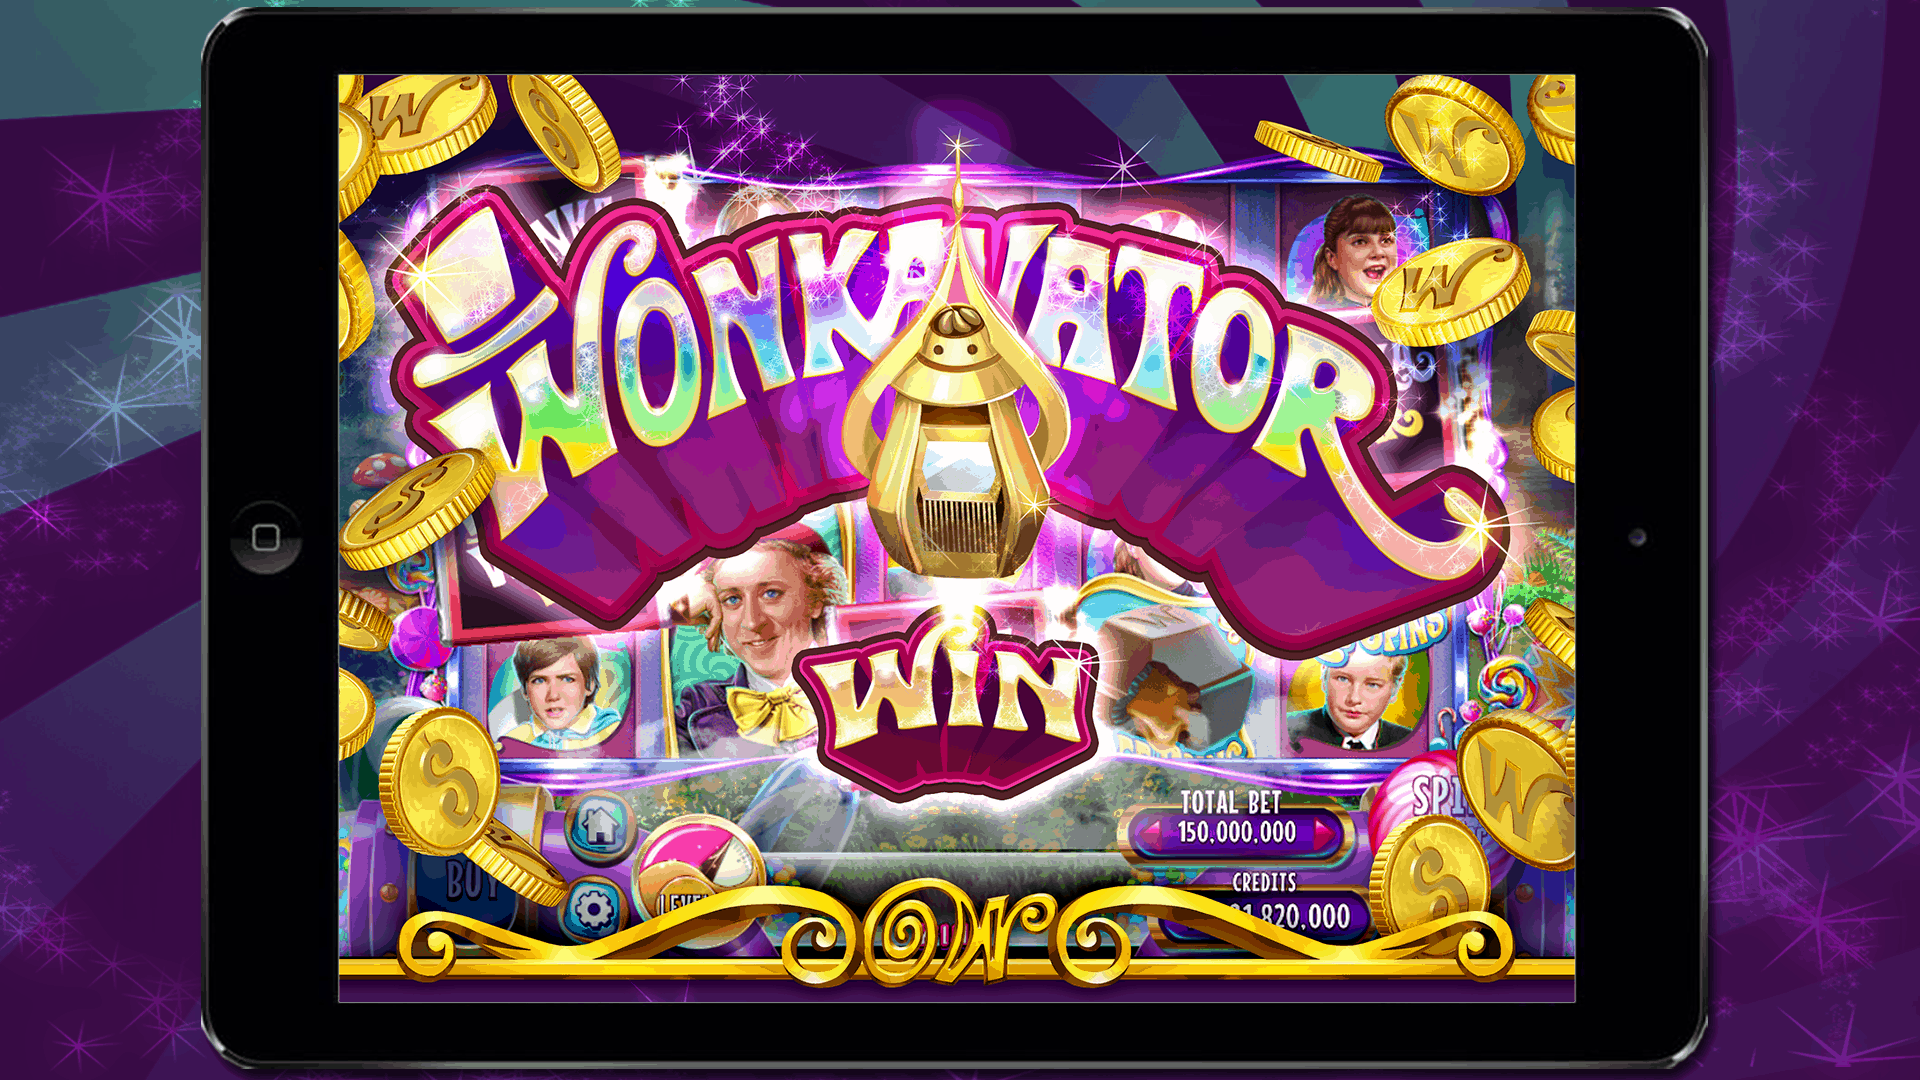 Willy wonka candy games online